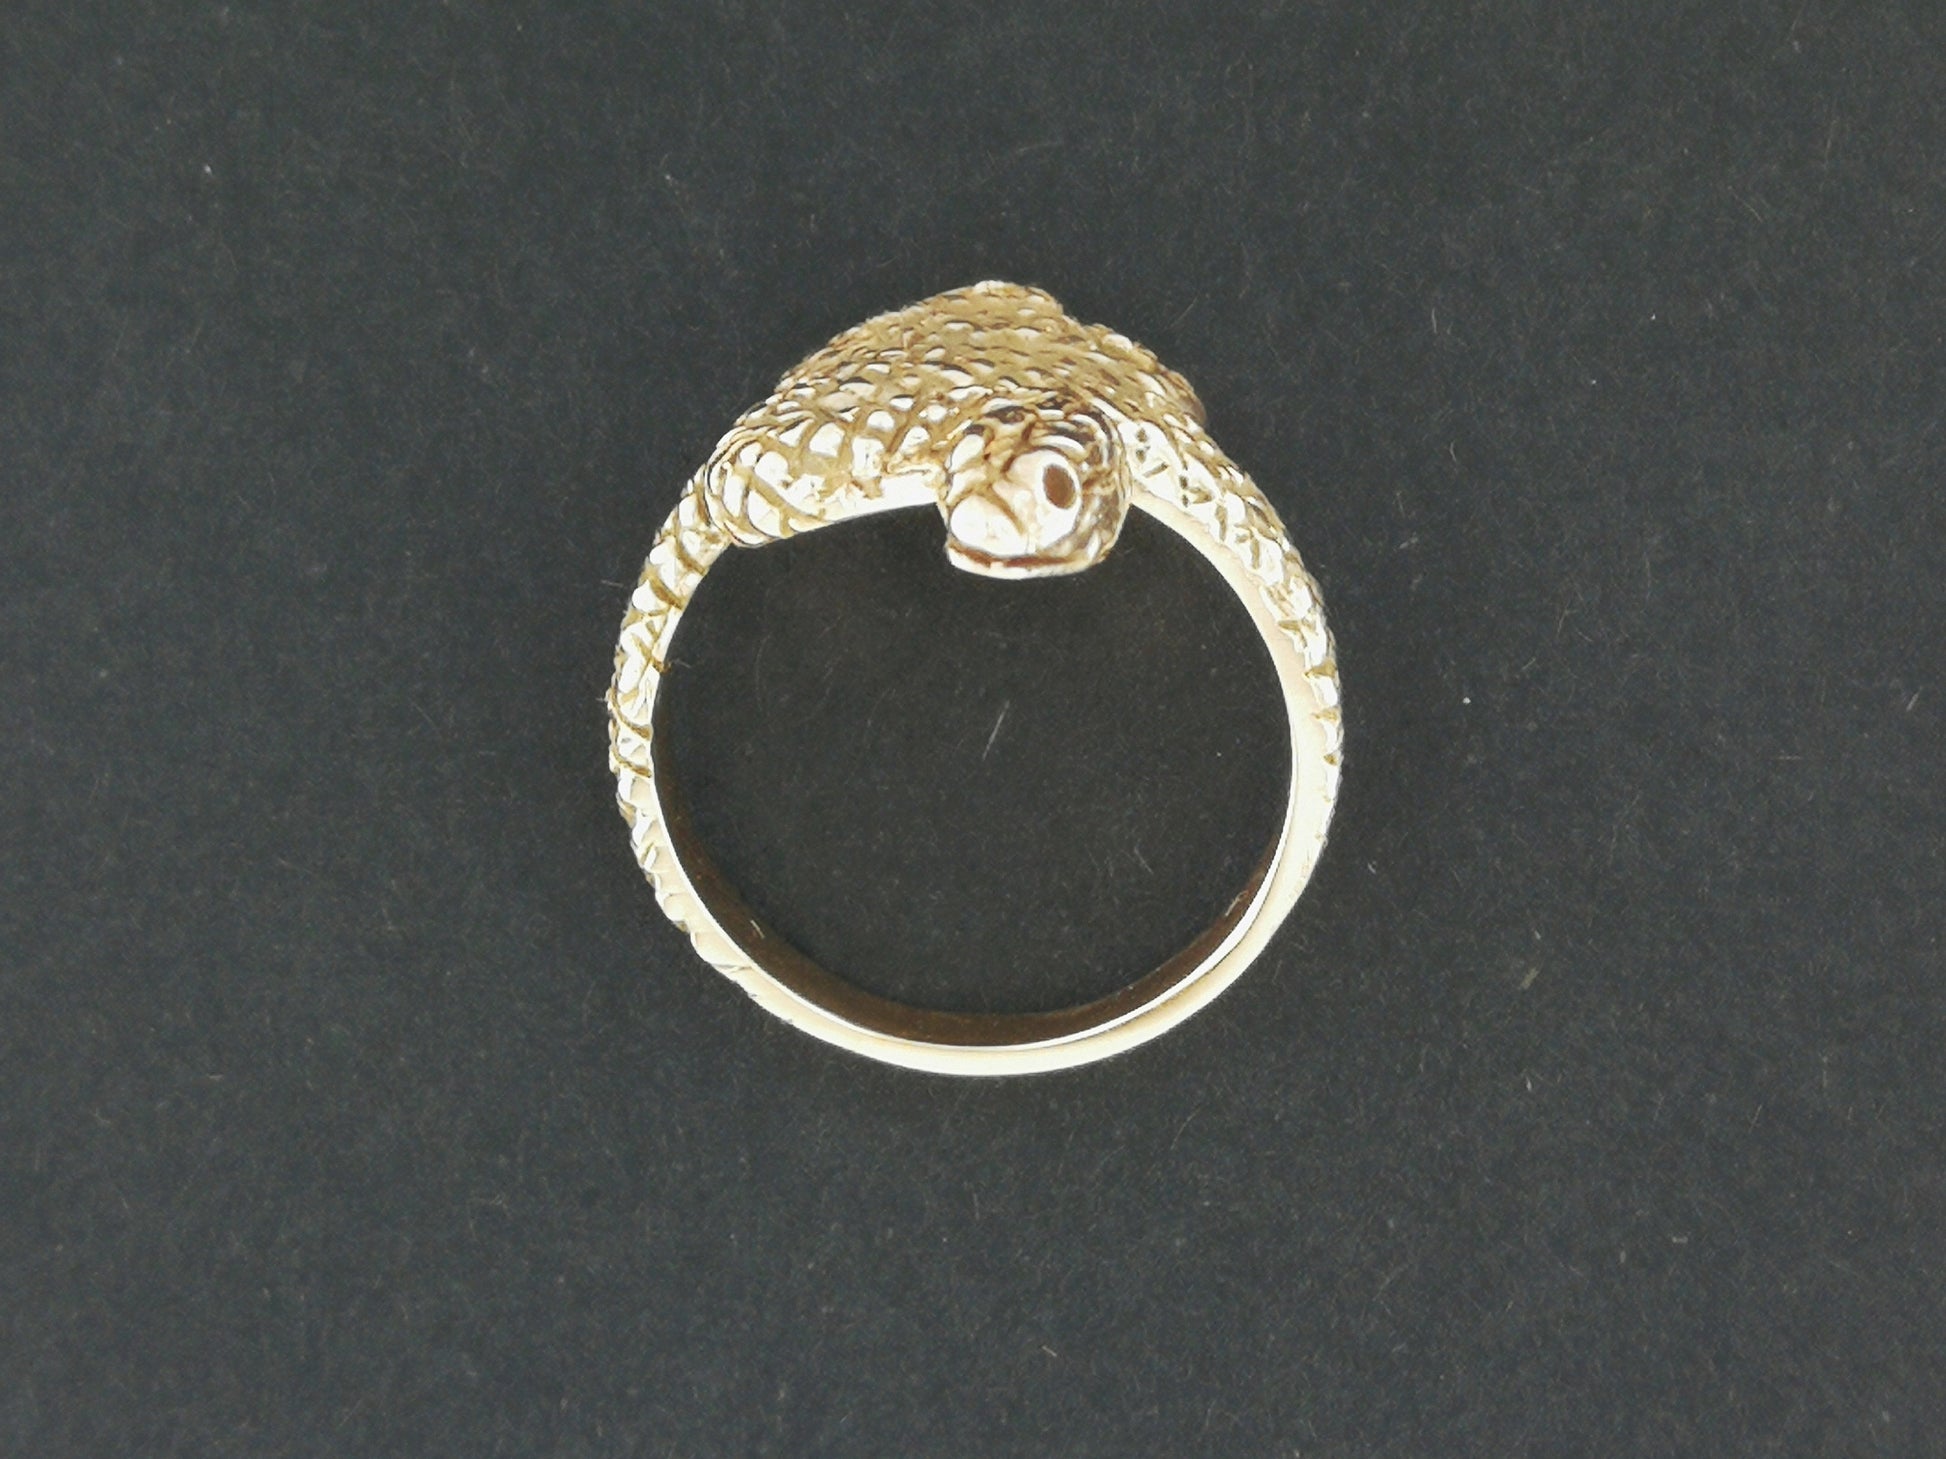 Coiled Snake Ring in 925 Silver or Bronze, 3D Snake Ring Jewellery, Bronze Reptile Rings, Delicate Snake Rings, Egyptian Snake Ring Jewelry, 50s Snake Ring, Bronze Snake Ring, Adjustable Serpent Ring, Bronze Serpent Ring, Vintage Snake Ring